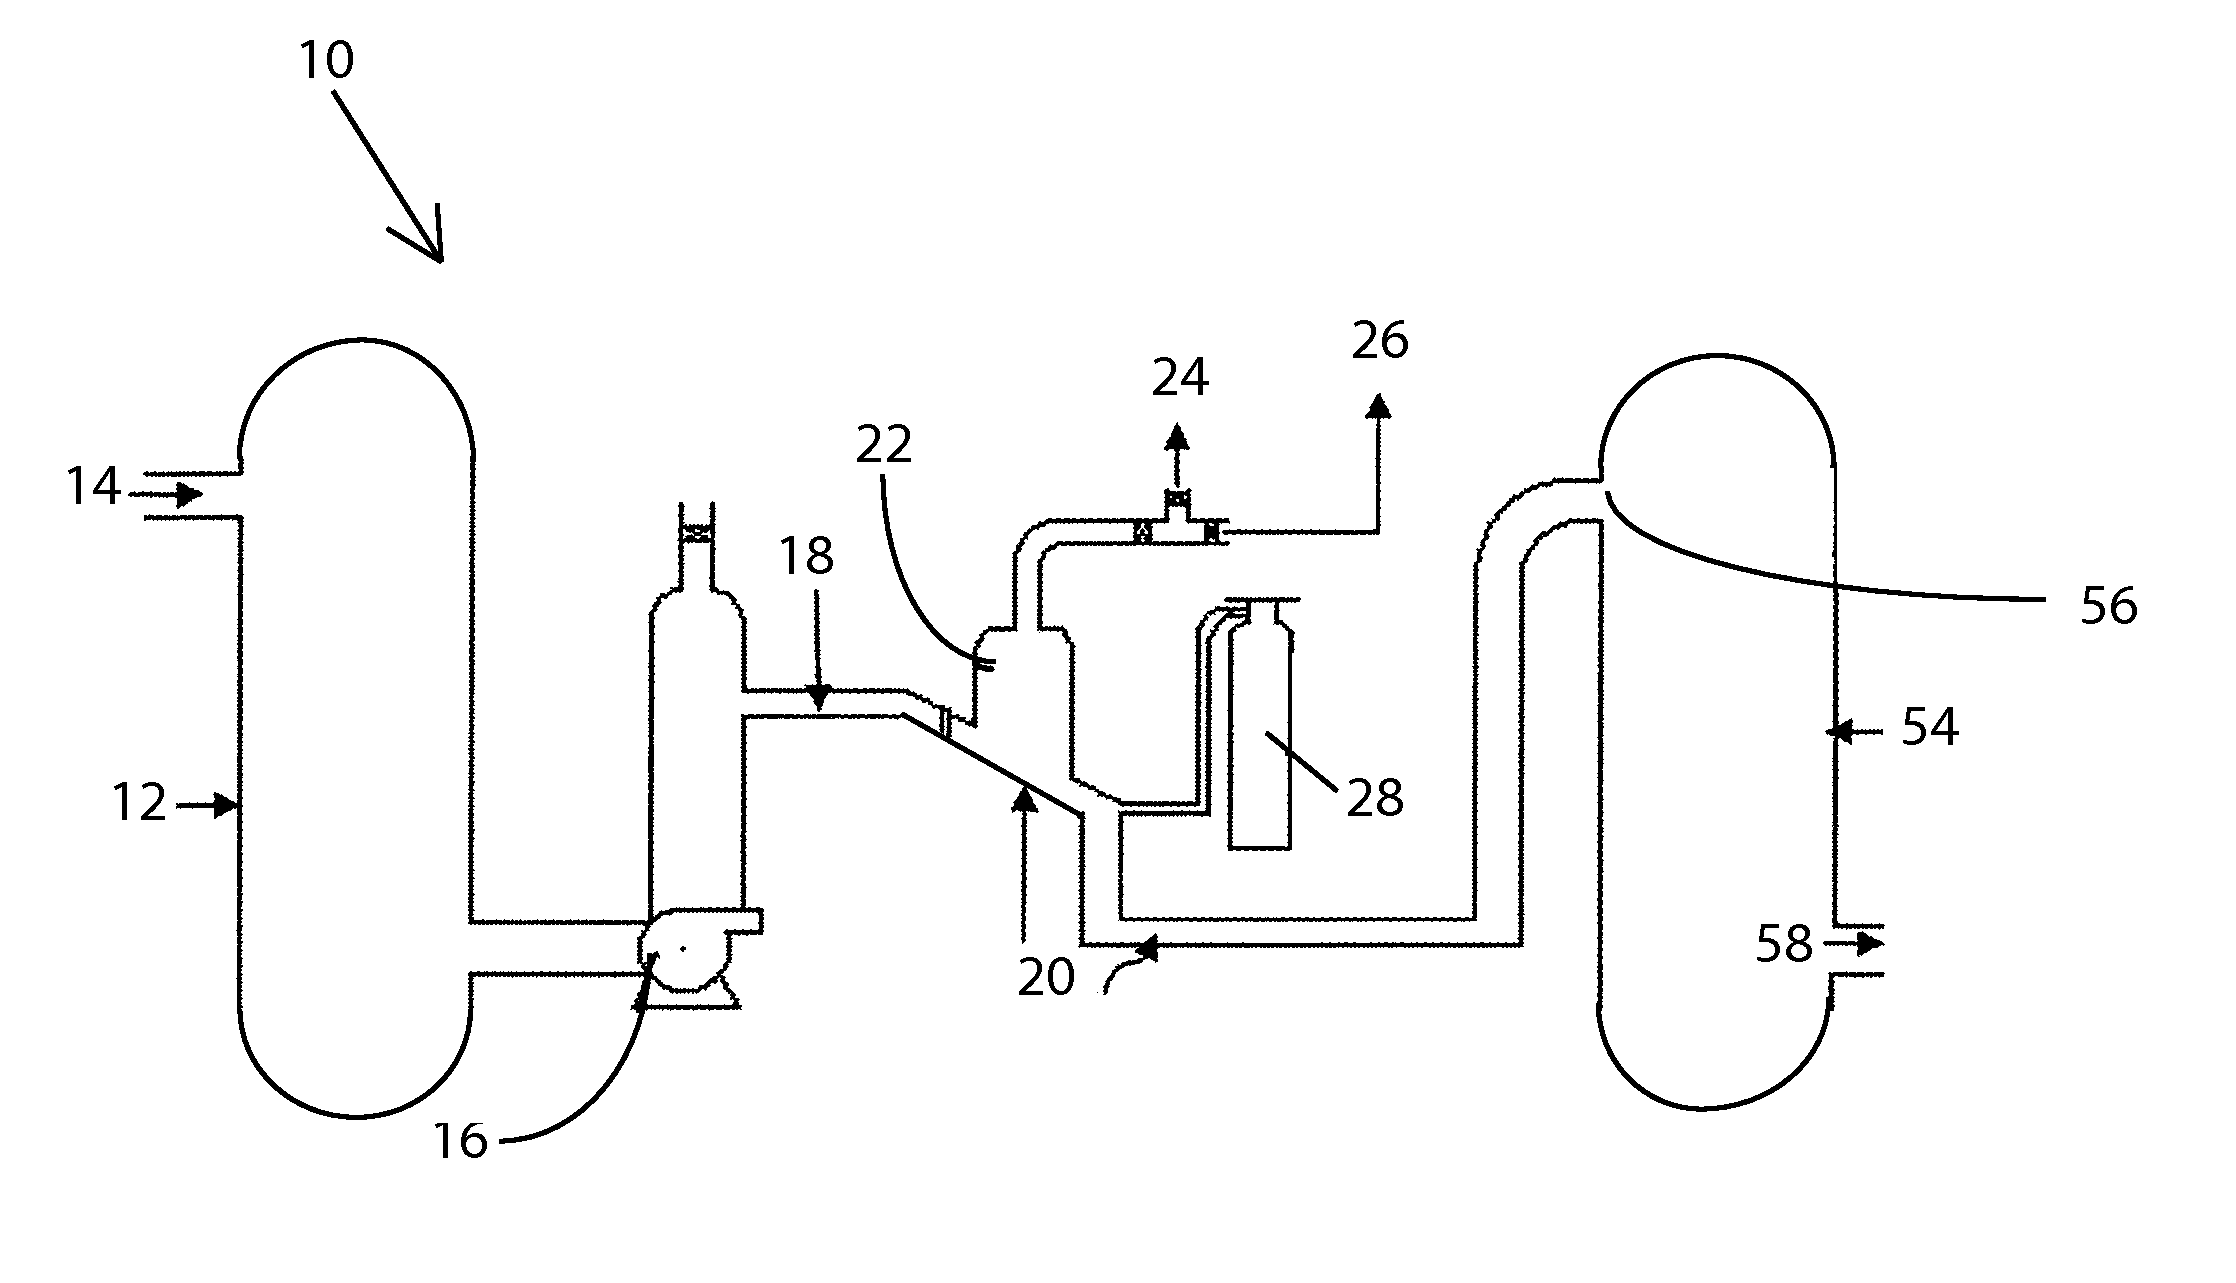 Method for UV photolytic separation of pollutant gases from an emission stream